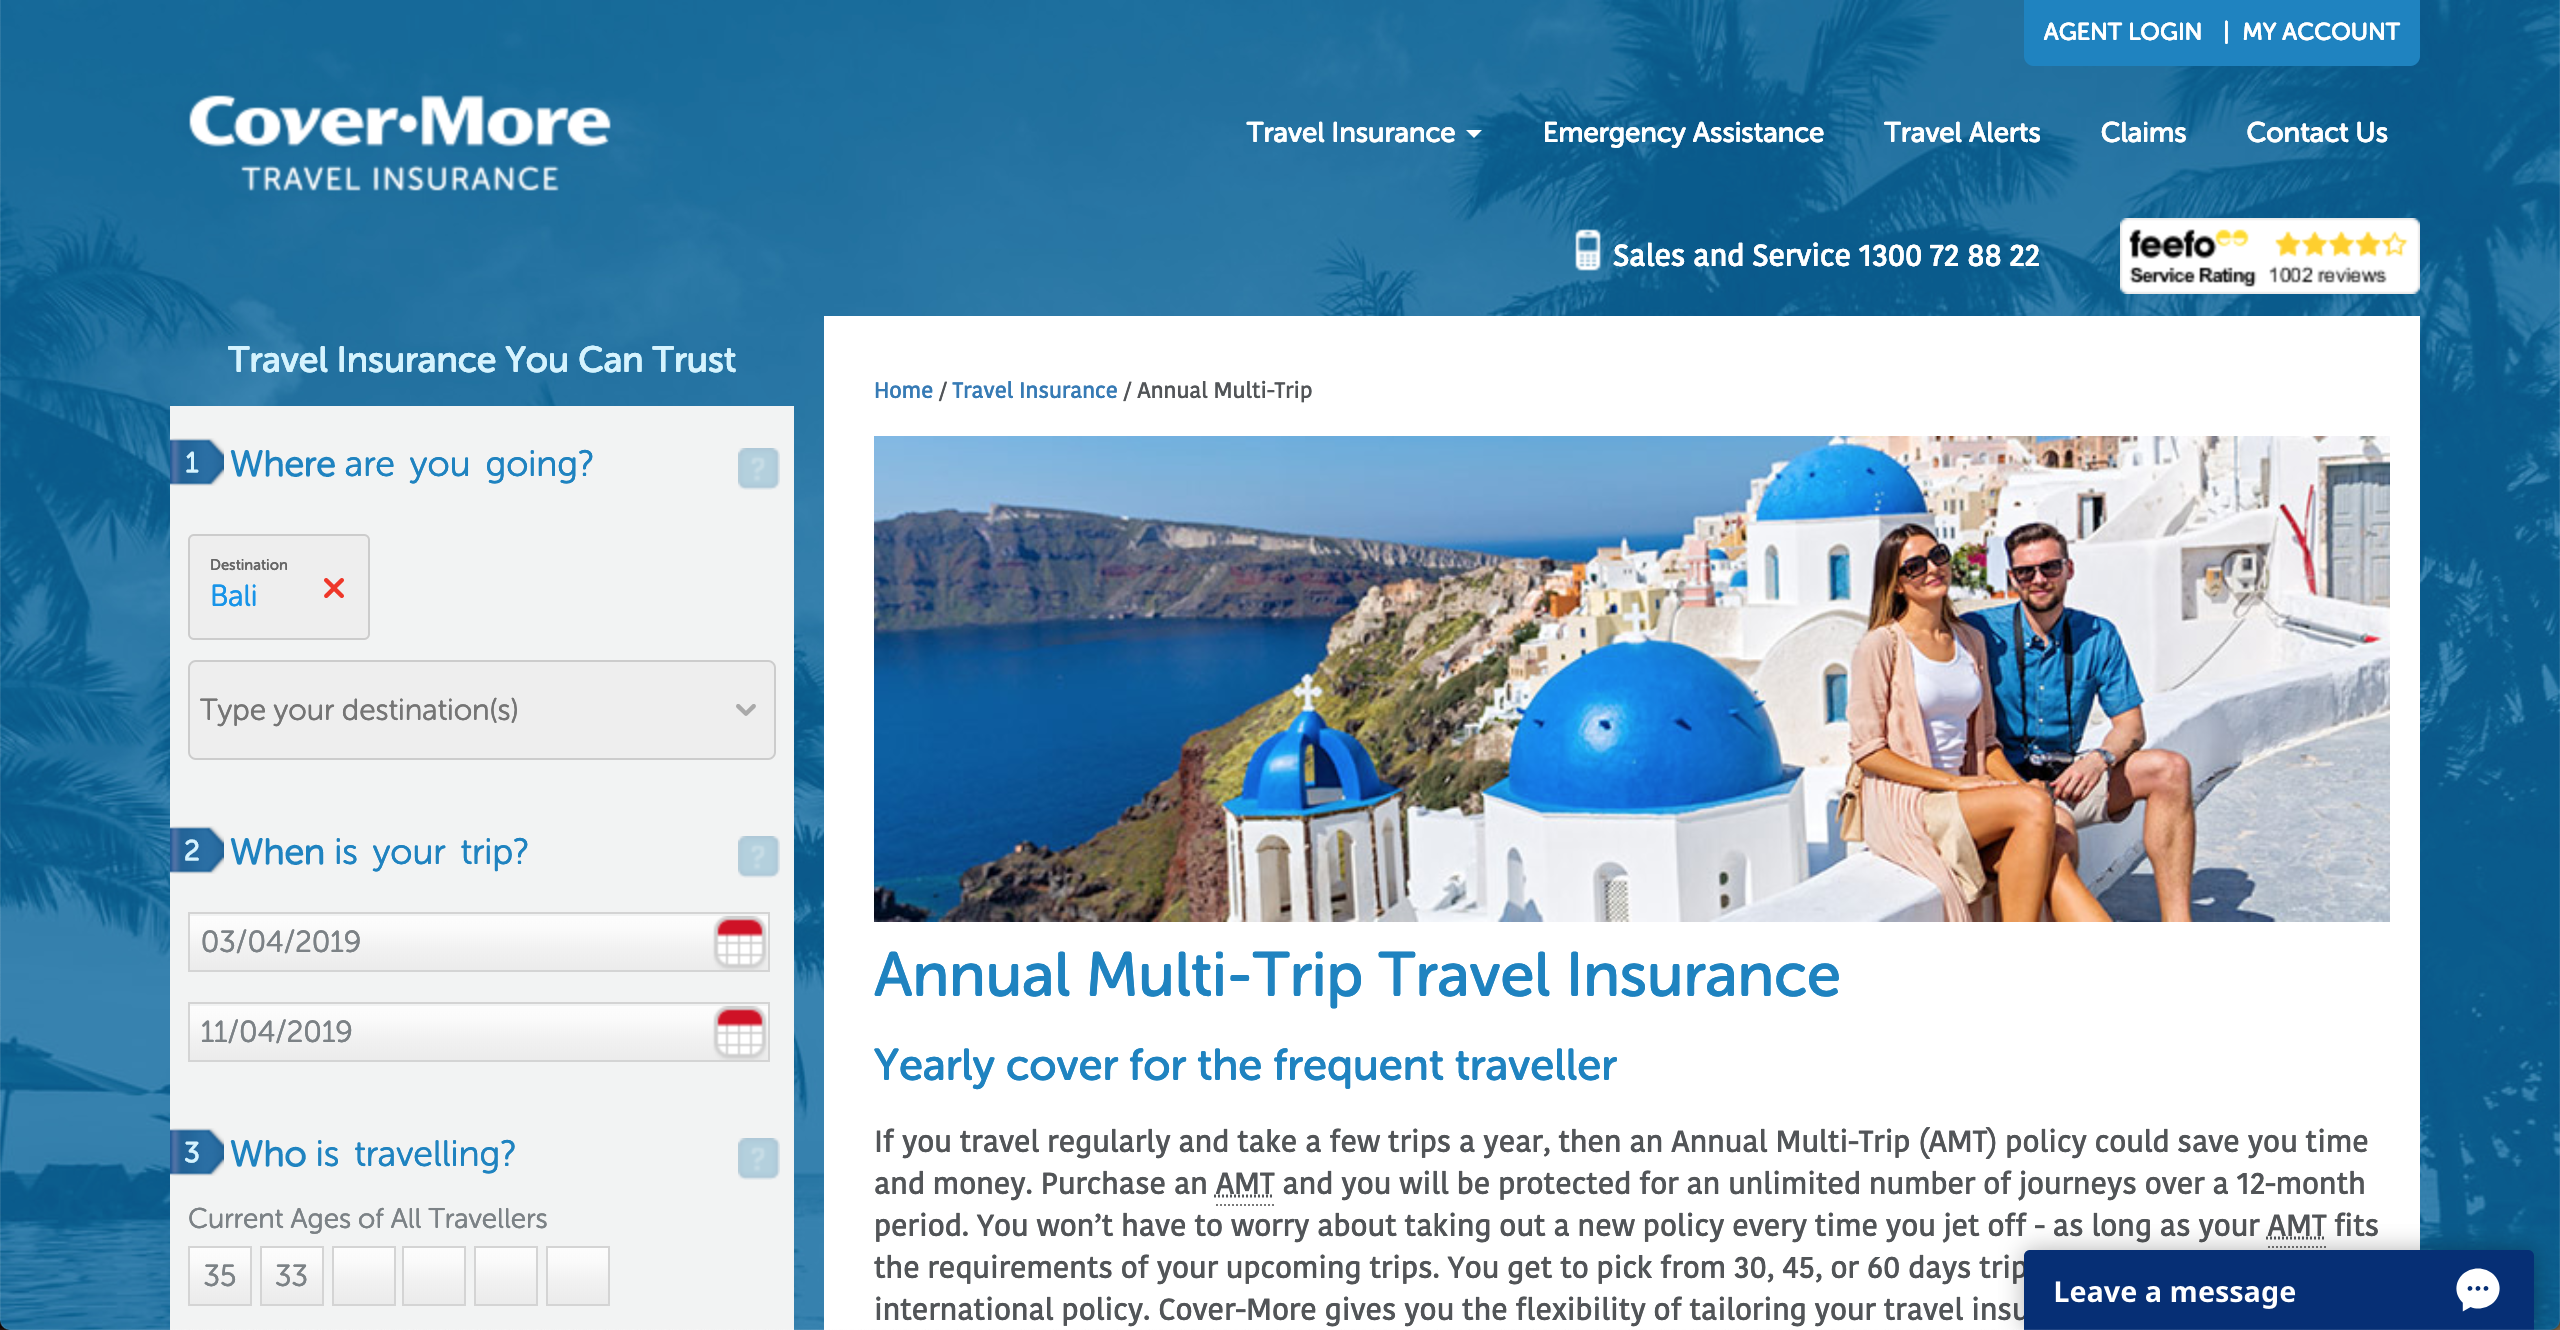 covermore travel insurance news